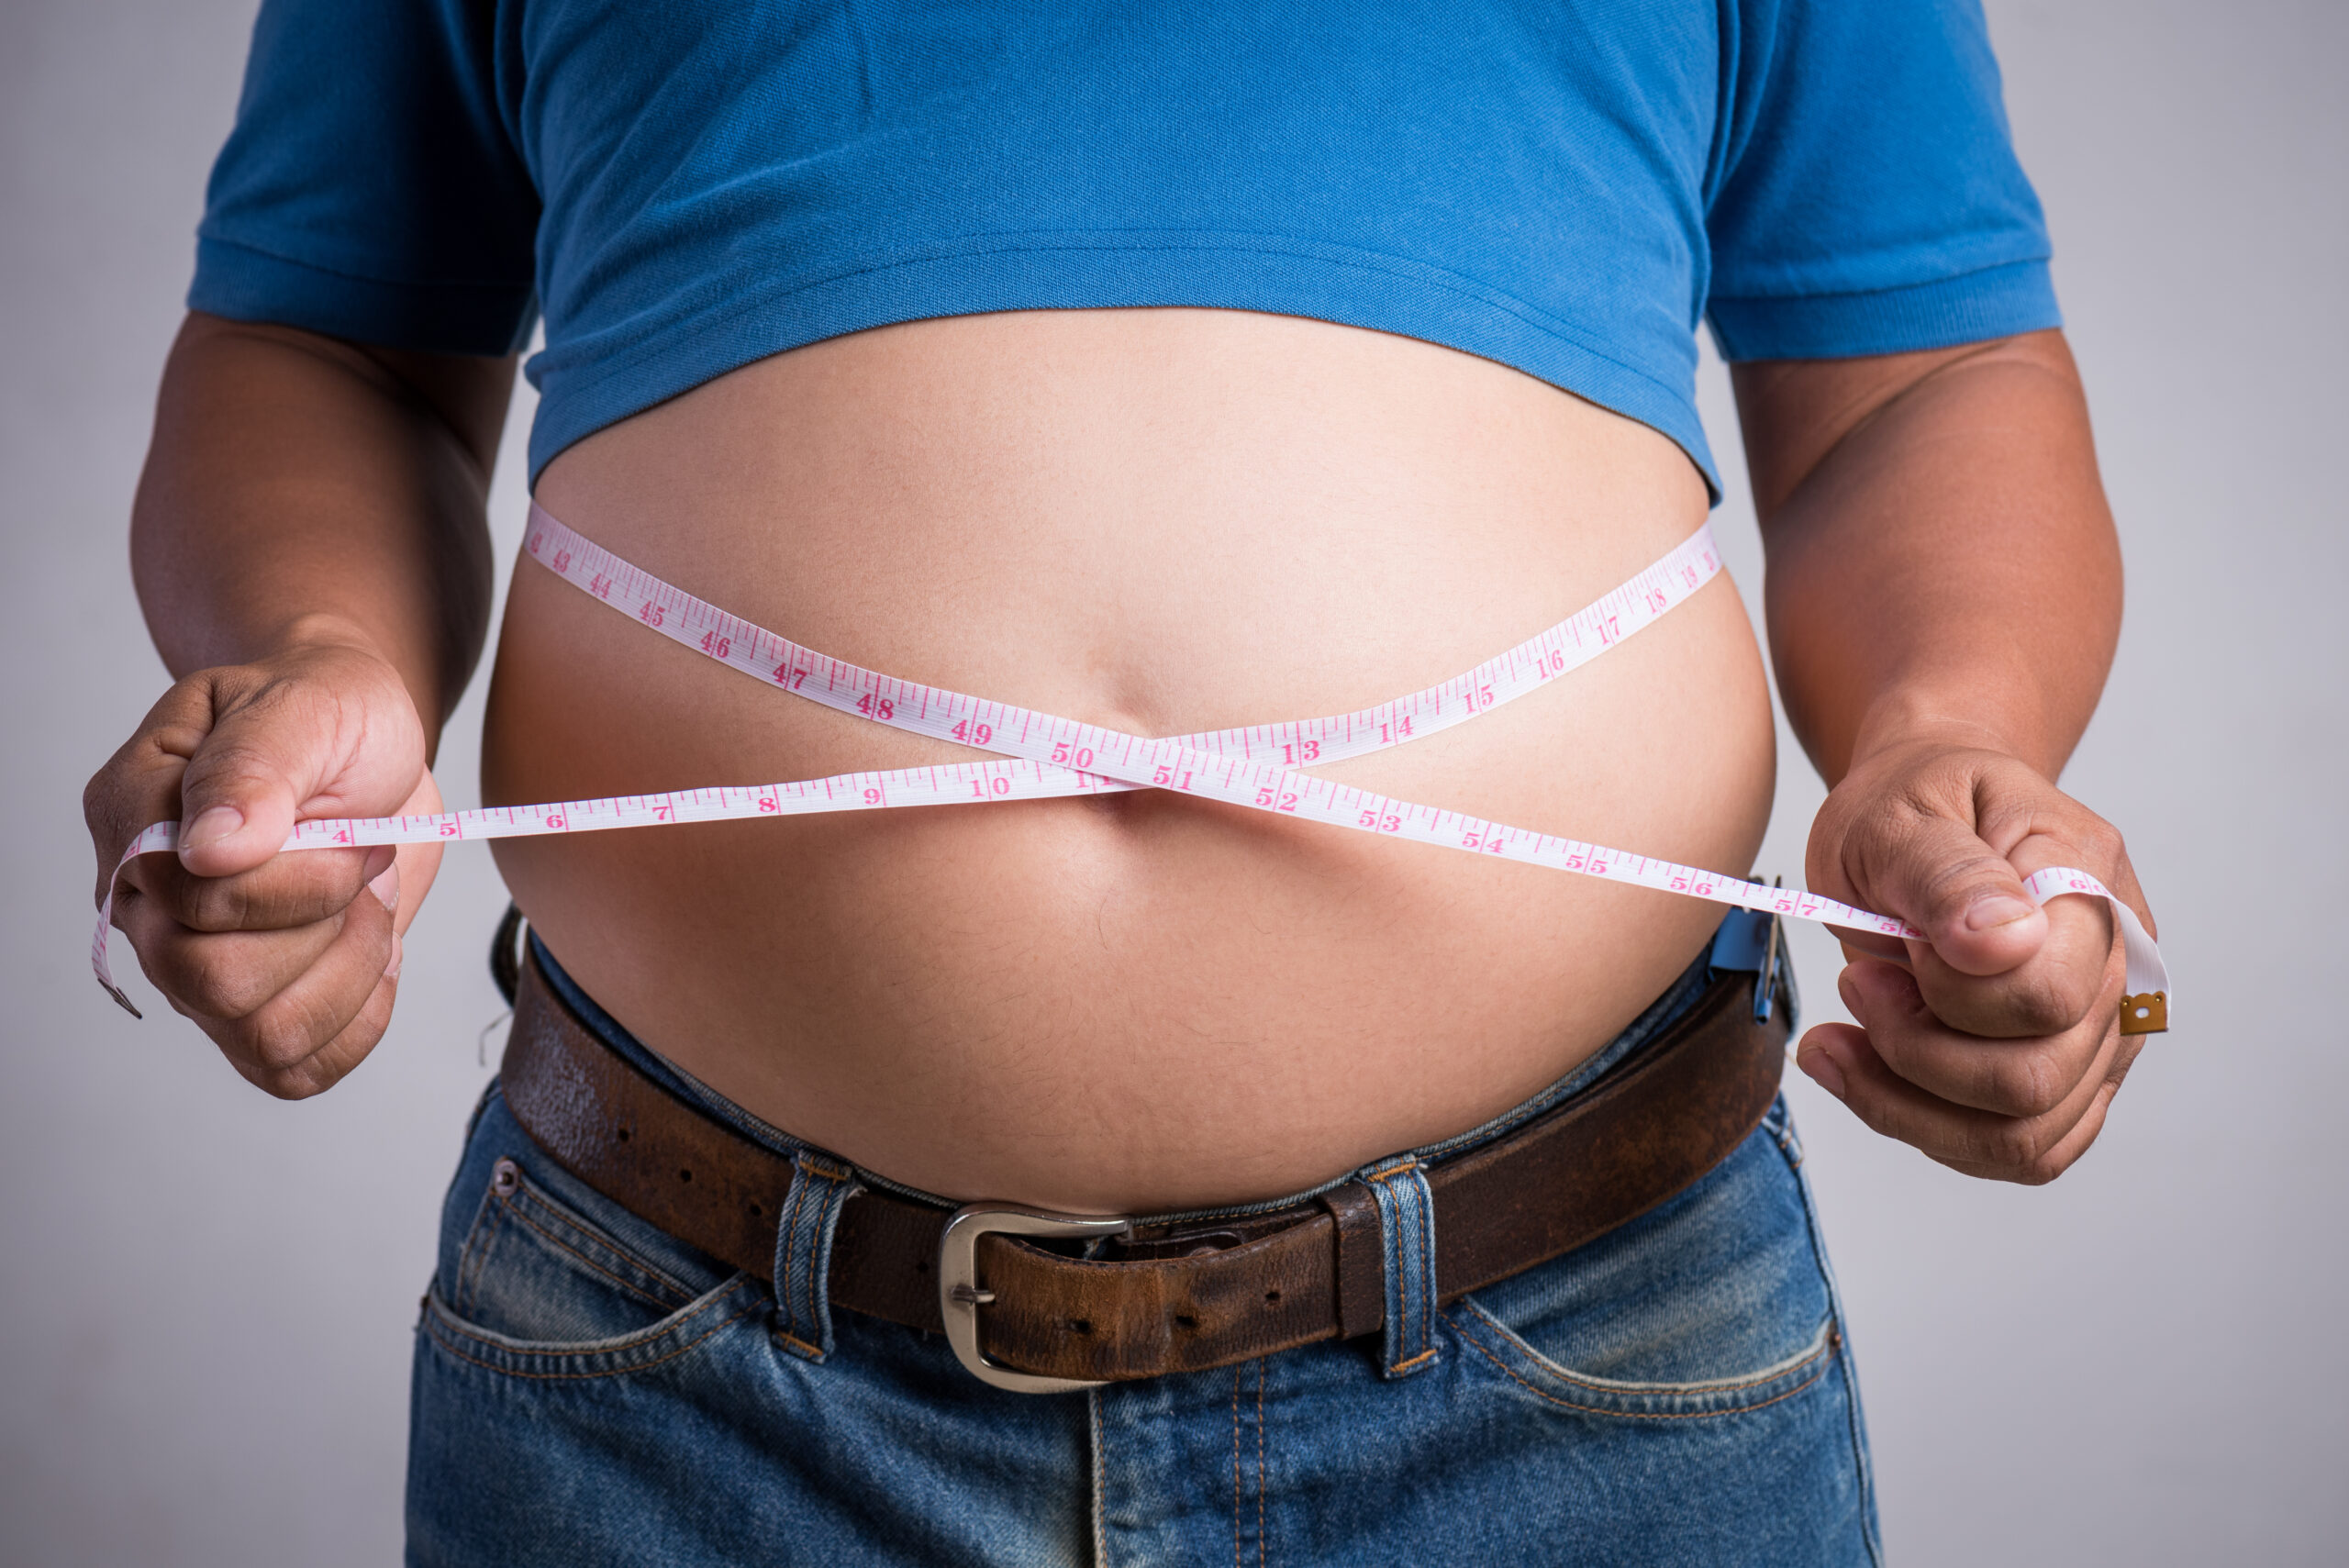 Overweight or fat adult man in very tight jeans with measuring t